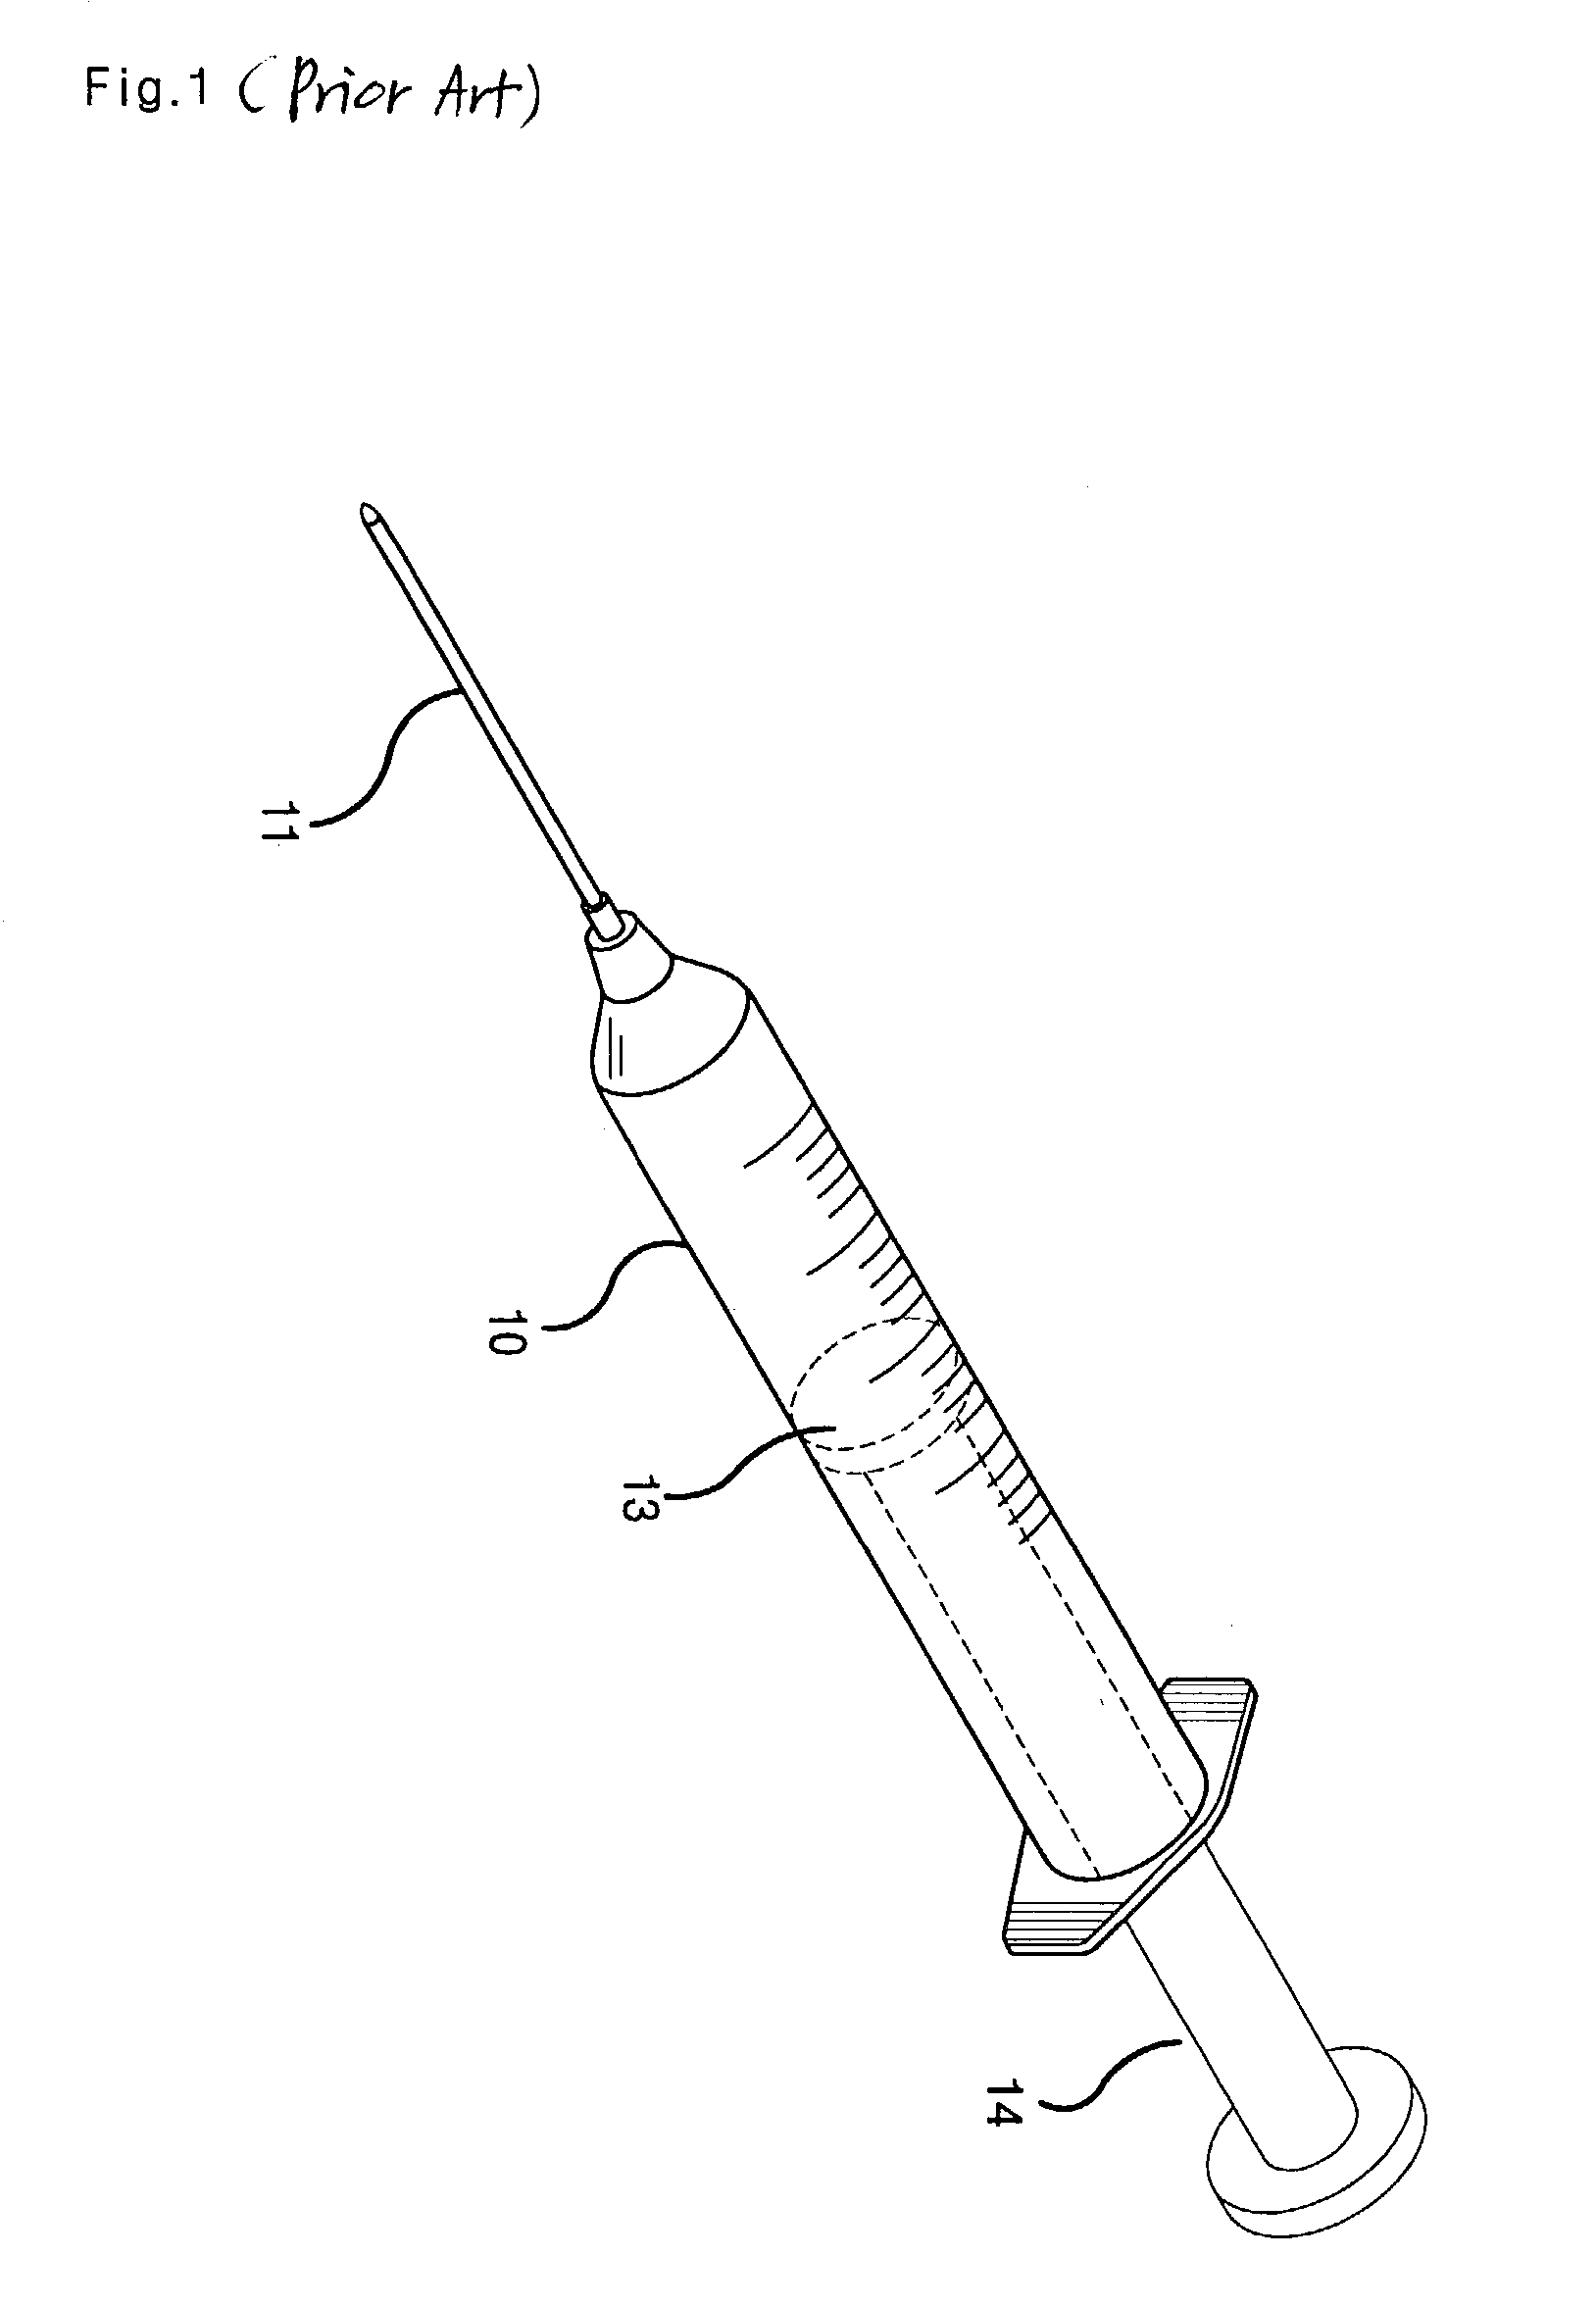 Syringe for collecting blood